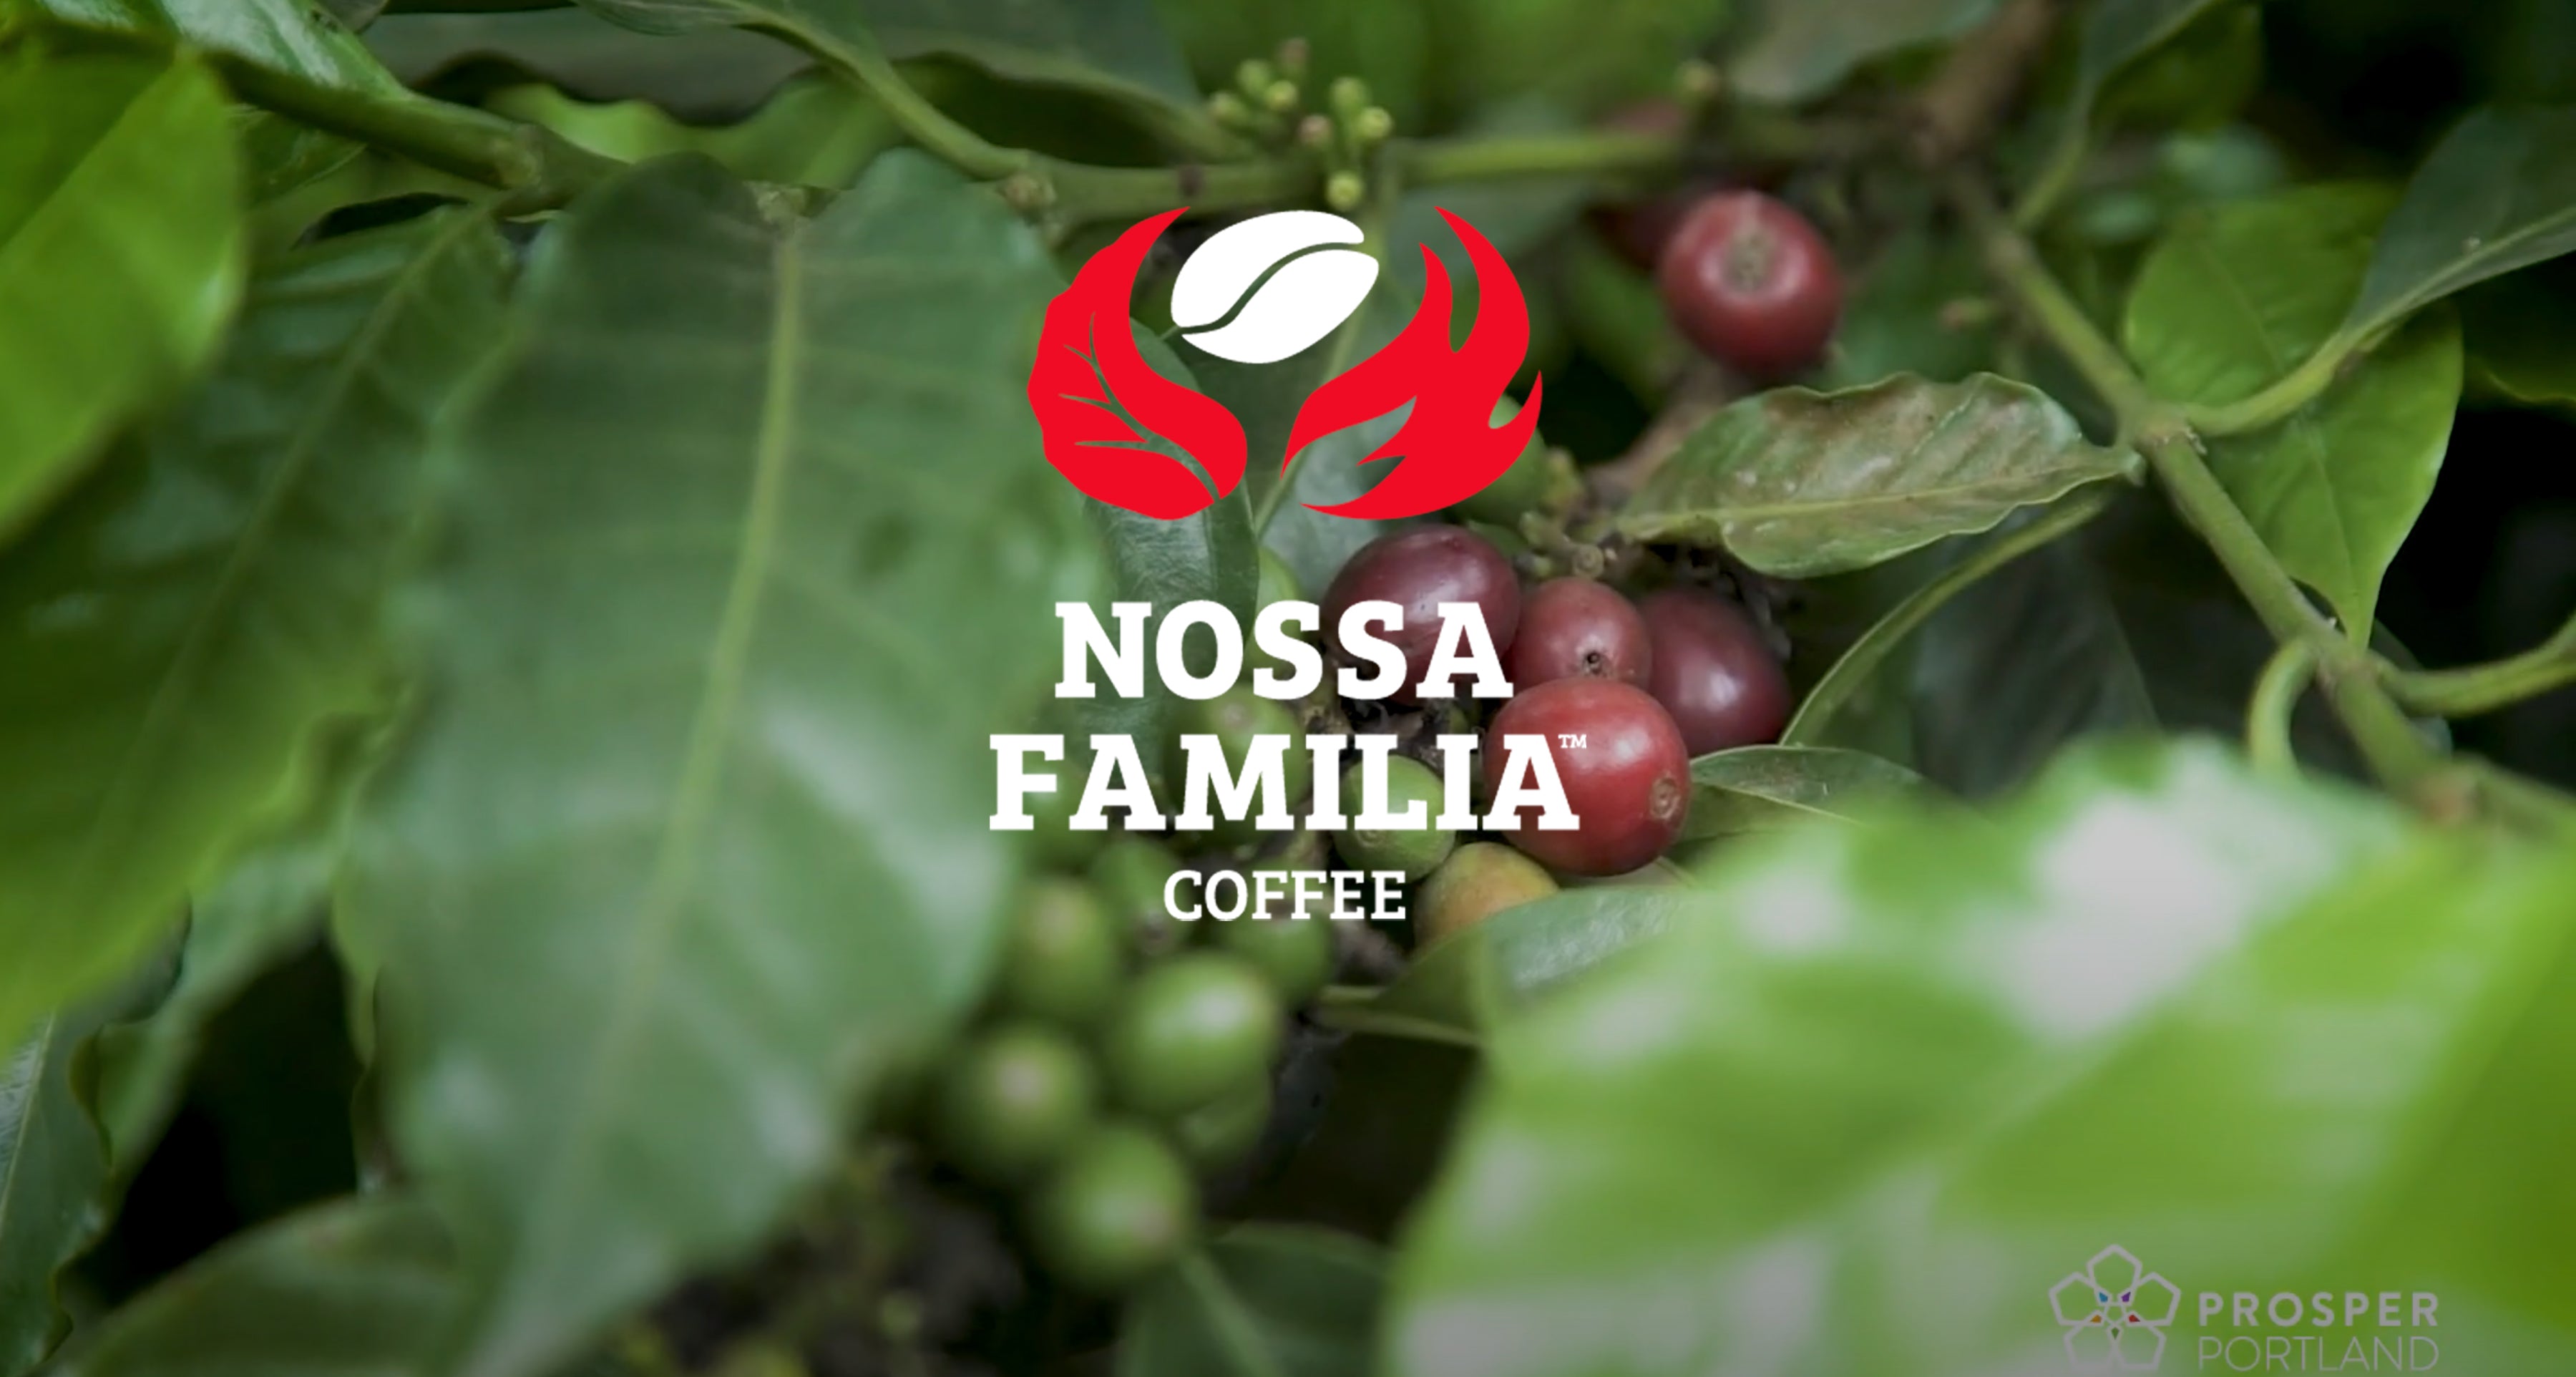 The Story of Nossa Familia in Partnership with Prosper Portland